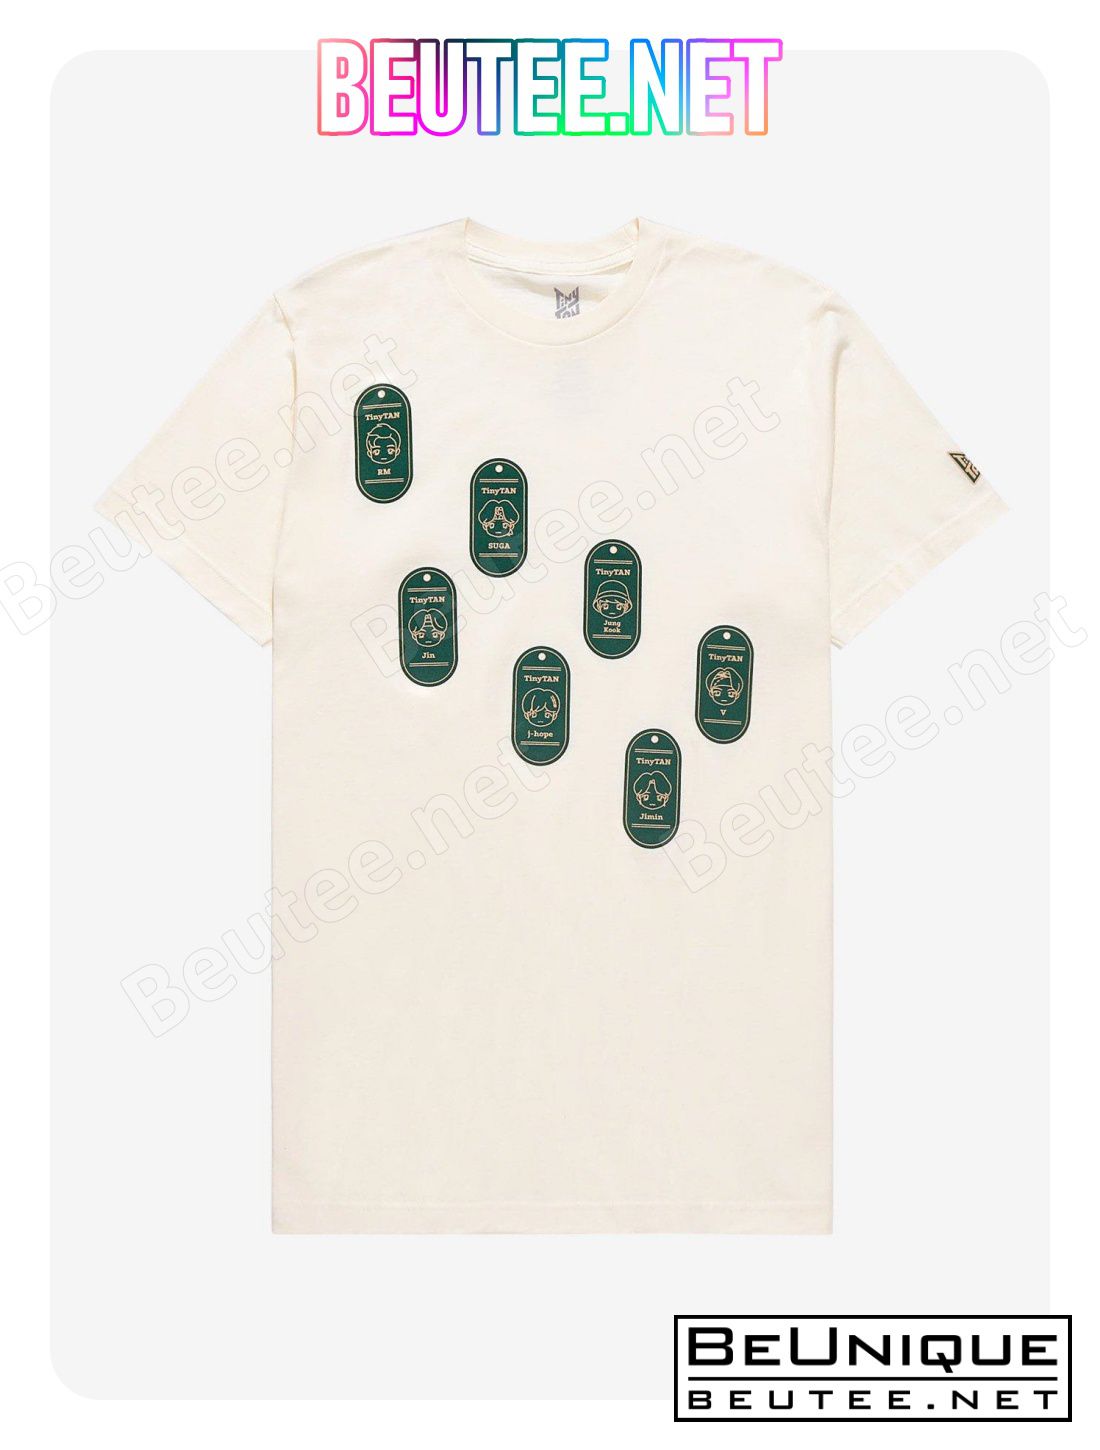 TinyTAN Member Wappen Badges T-Shirt Inspired by BTS Hot Topic Exclusive